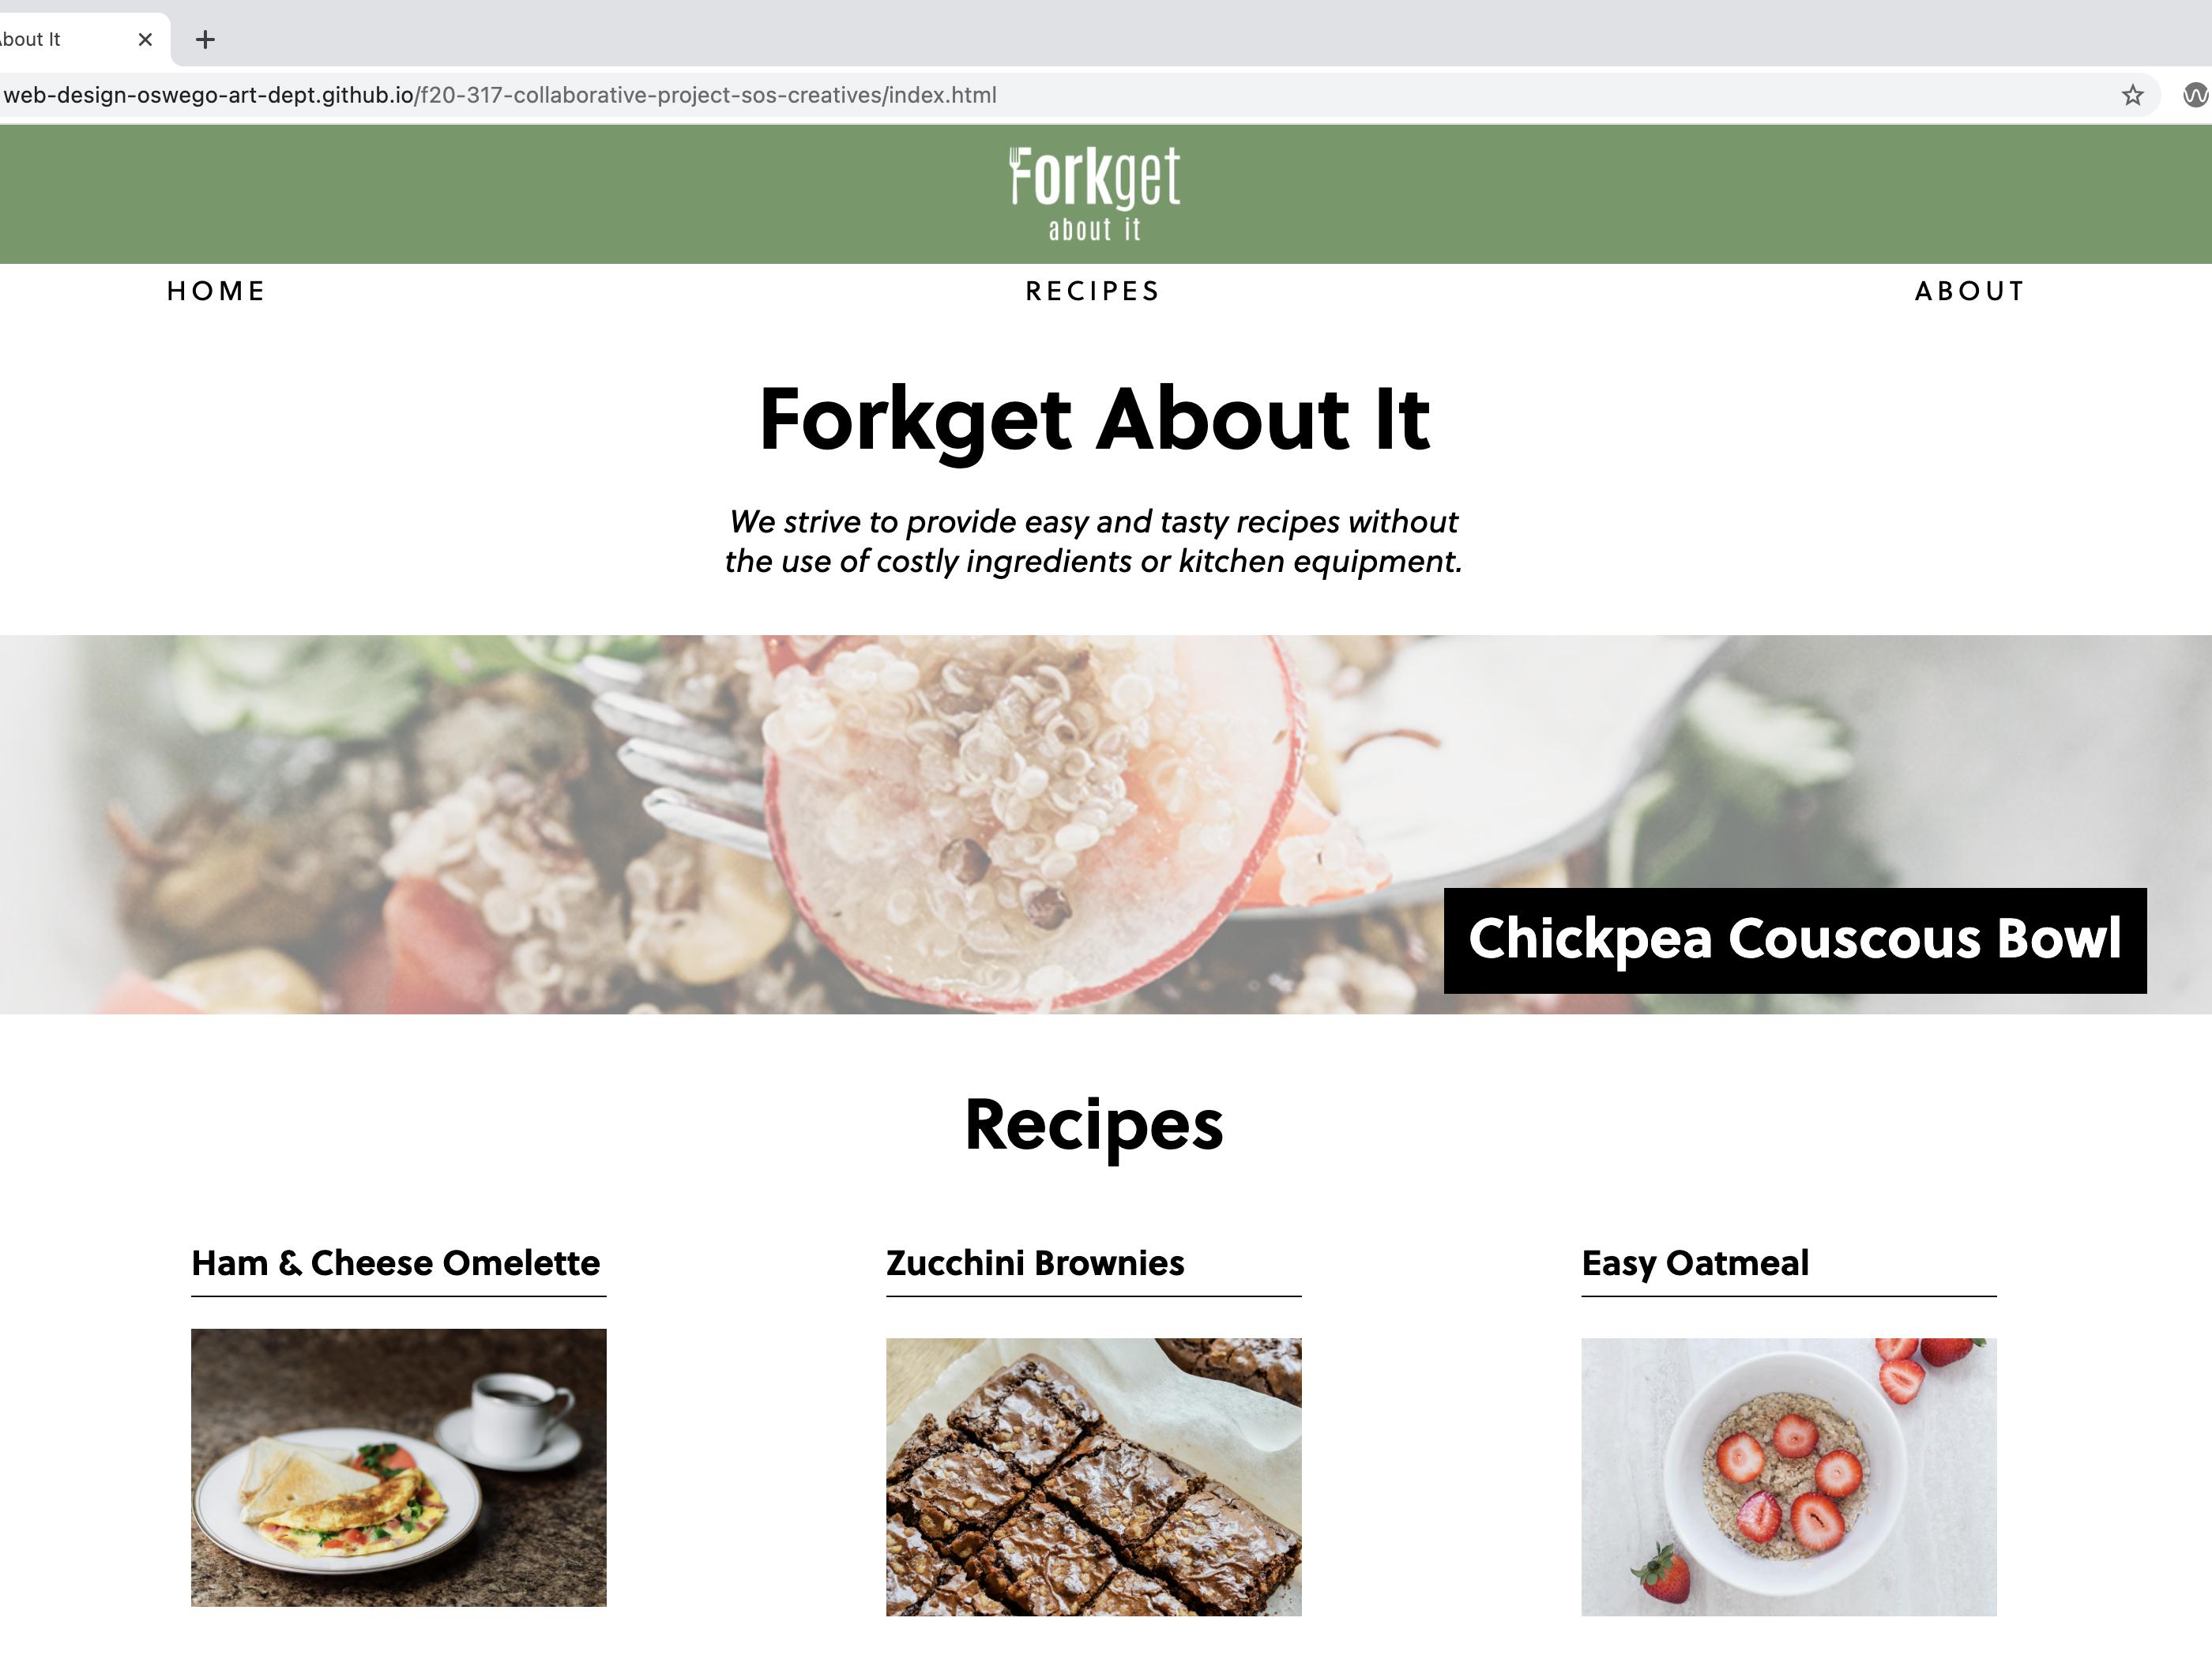 Image from Forkget About It website, offering easy, creative recipes that are inexpensive to prepare